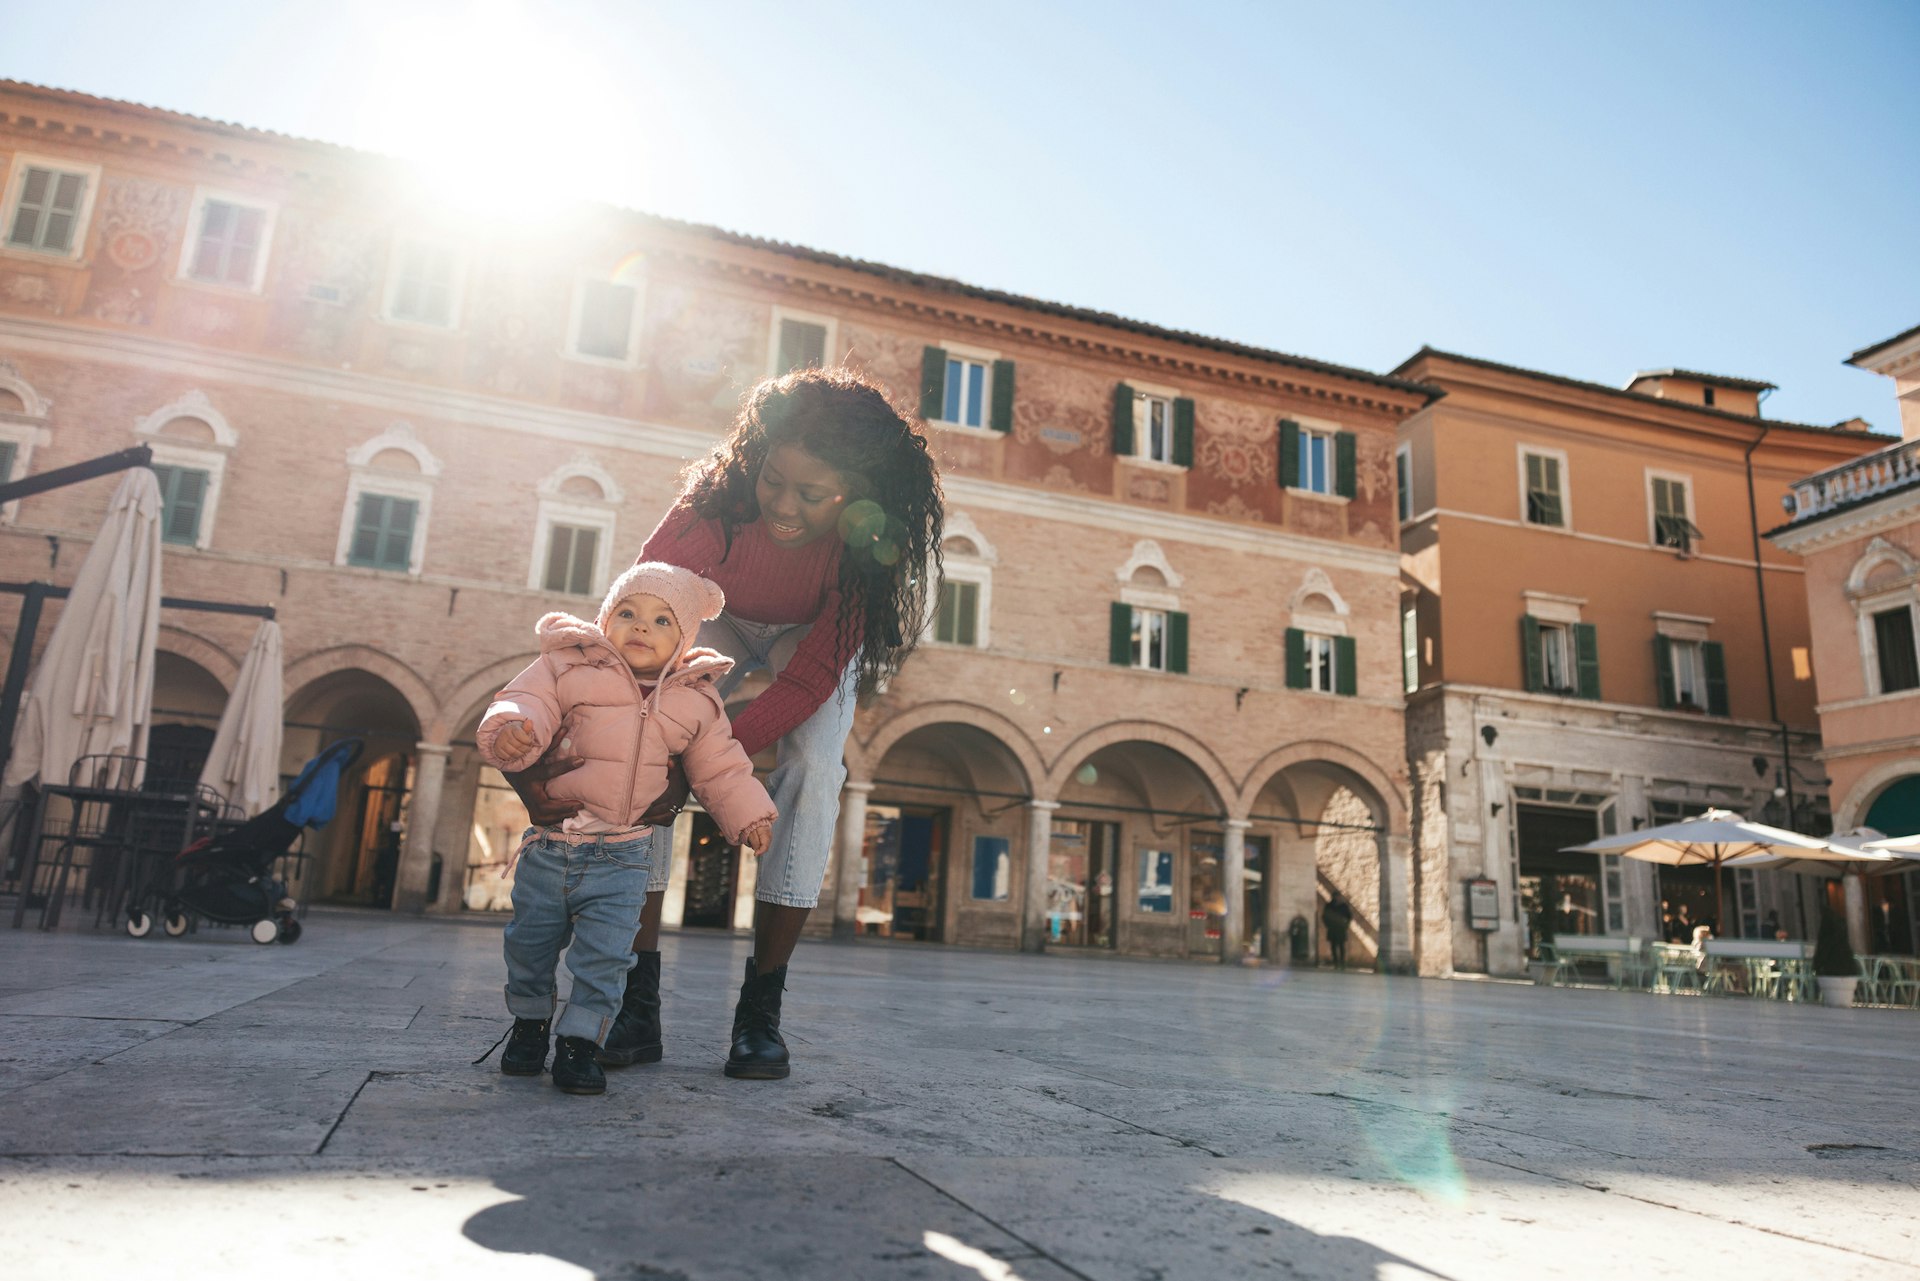 A mother walking with her baby girl in a city square in Italy